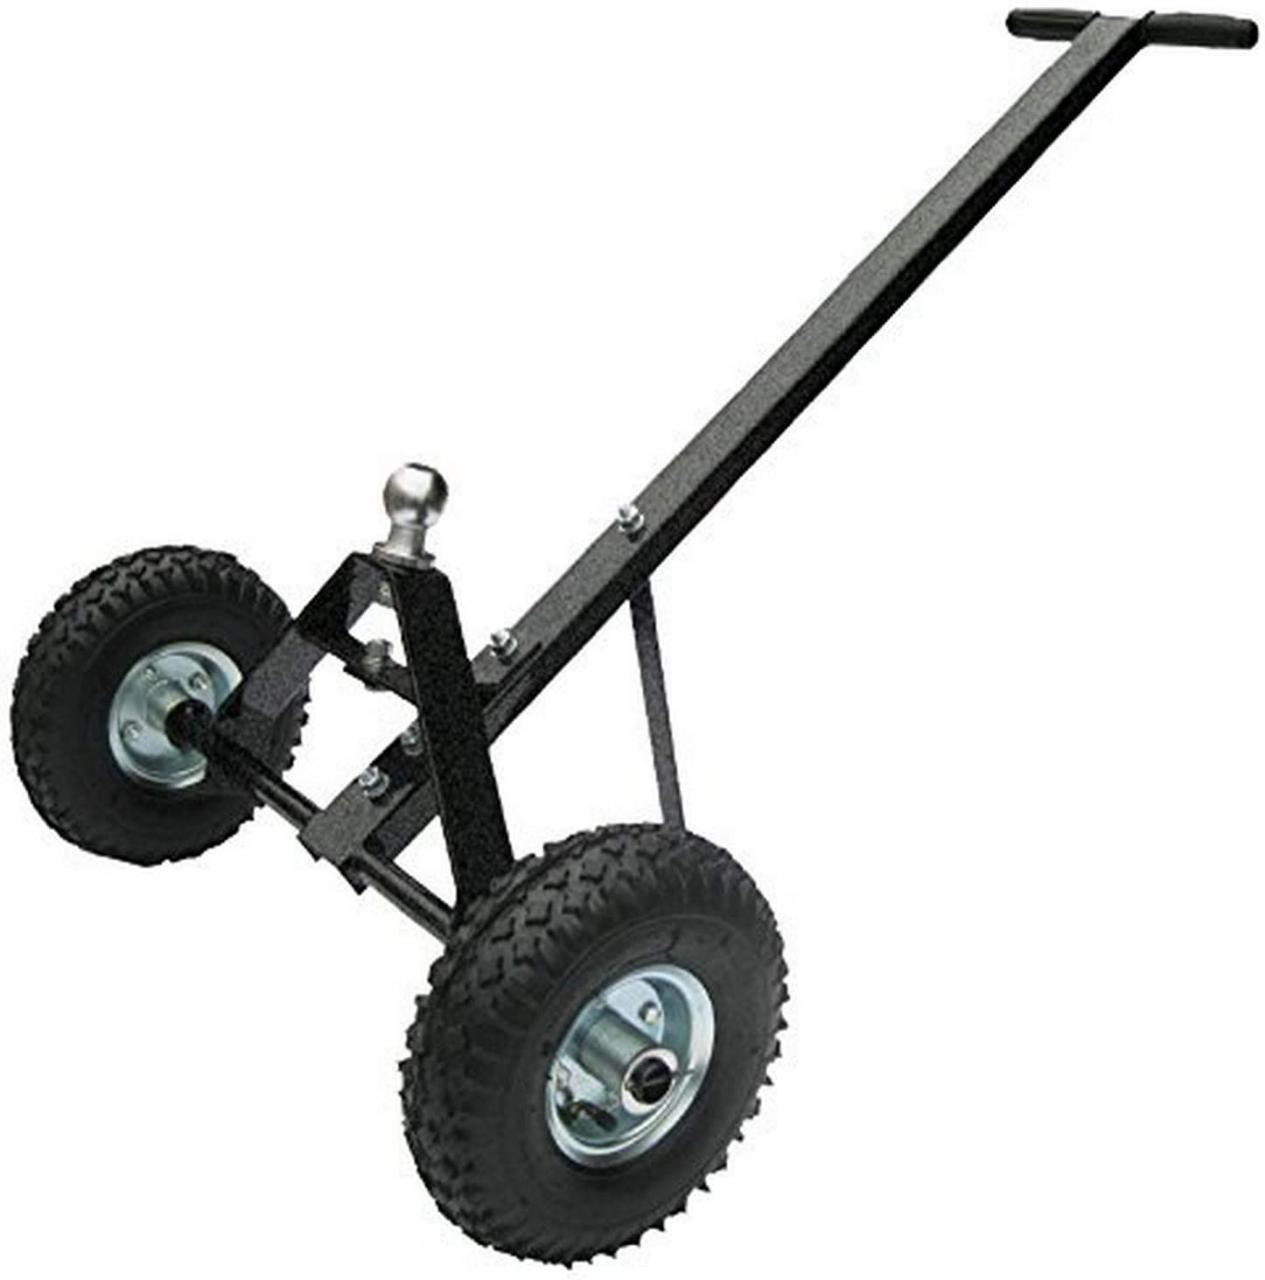 Buy Tow Tuff TMD-600 Trailer Dolly Online in Hungary. B00AL1A5H6